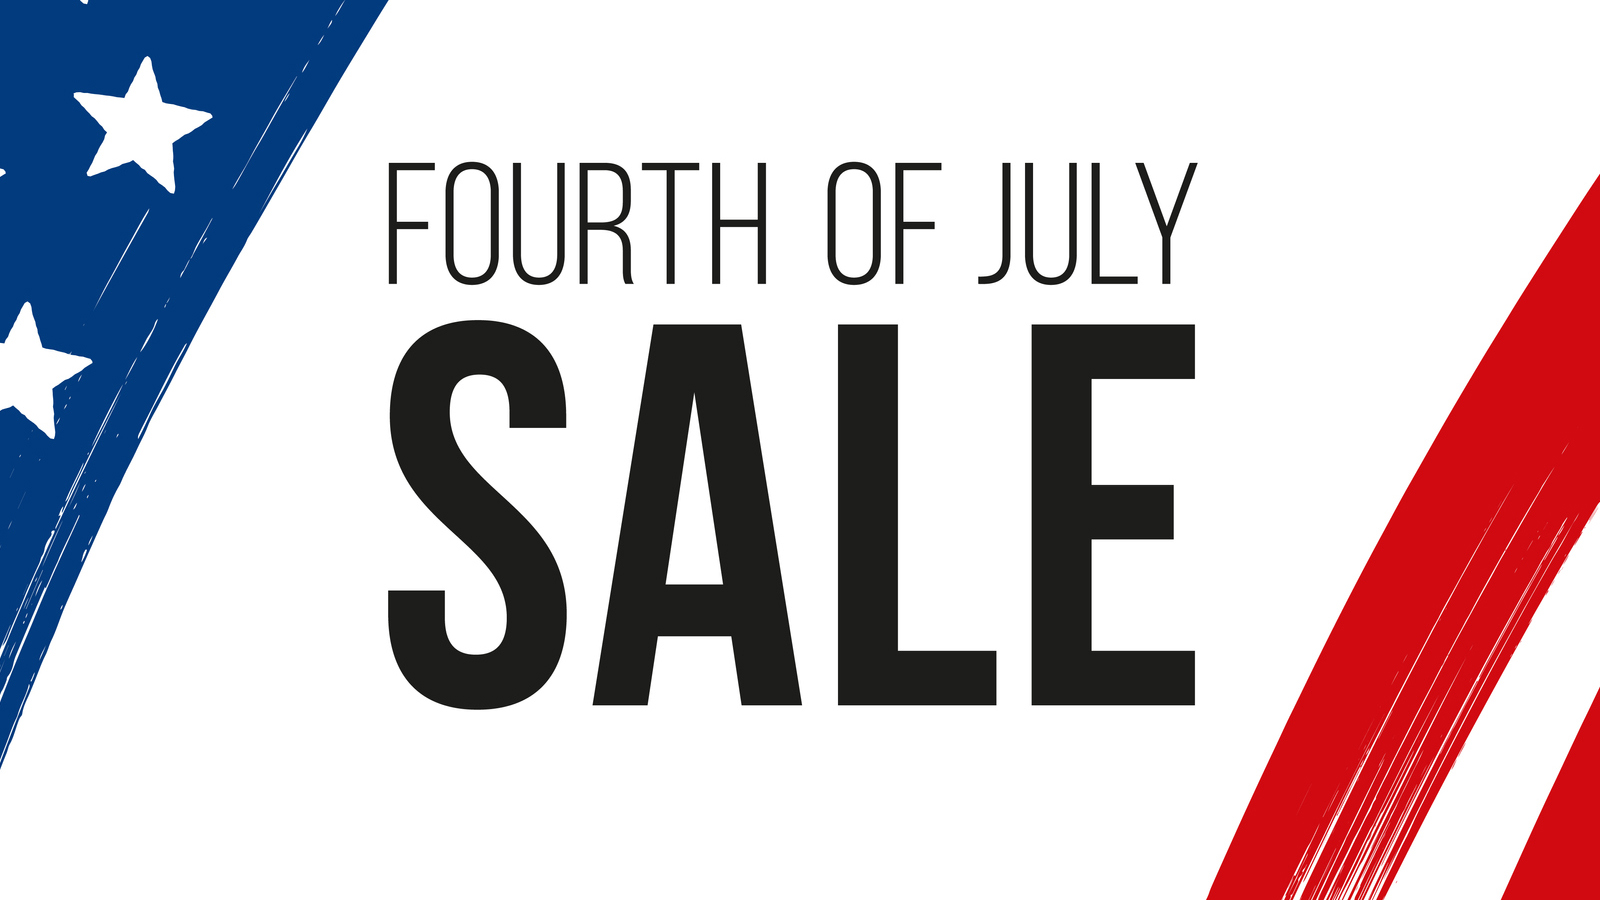 fitbit 4th of july sale